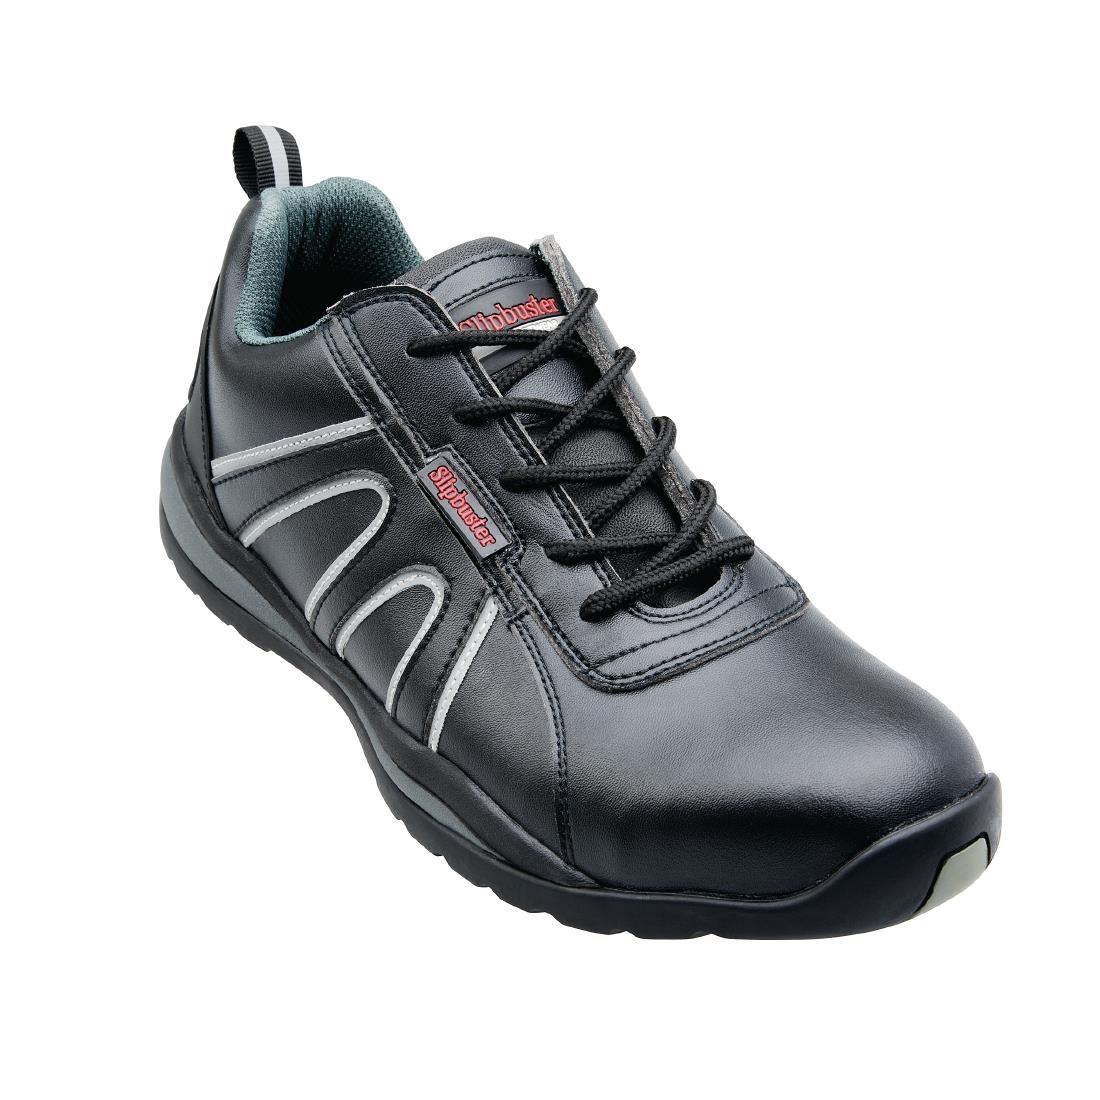 Slipbuster Safety Trainers Black 46 - A708-46  - 5